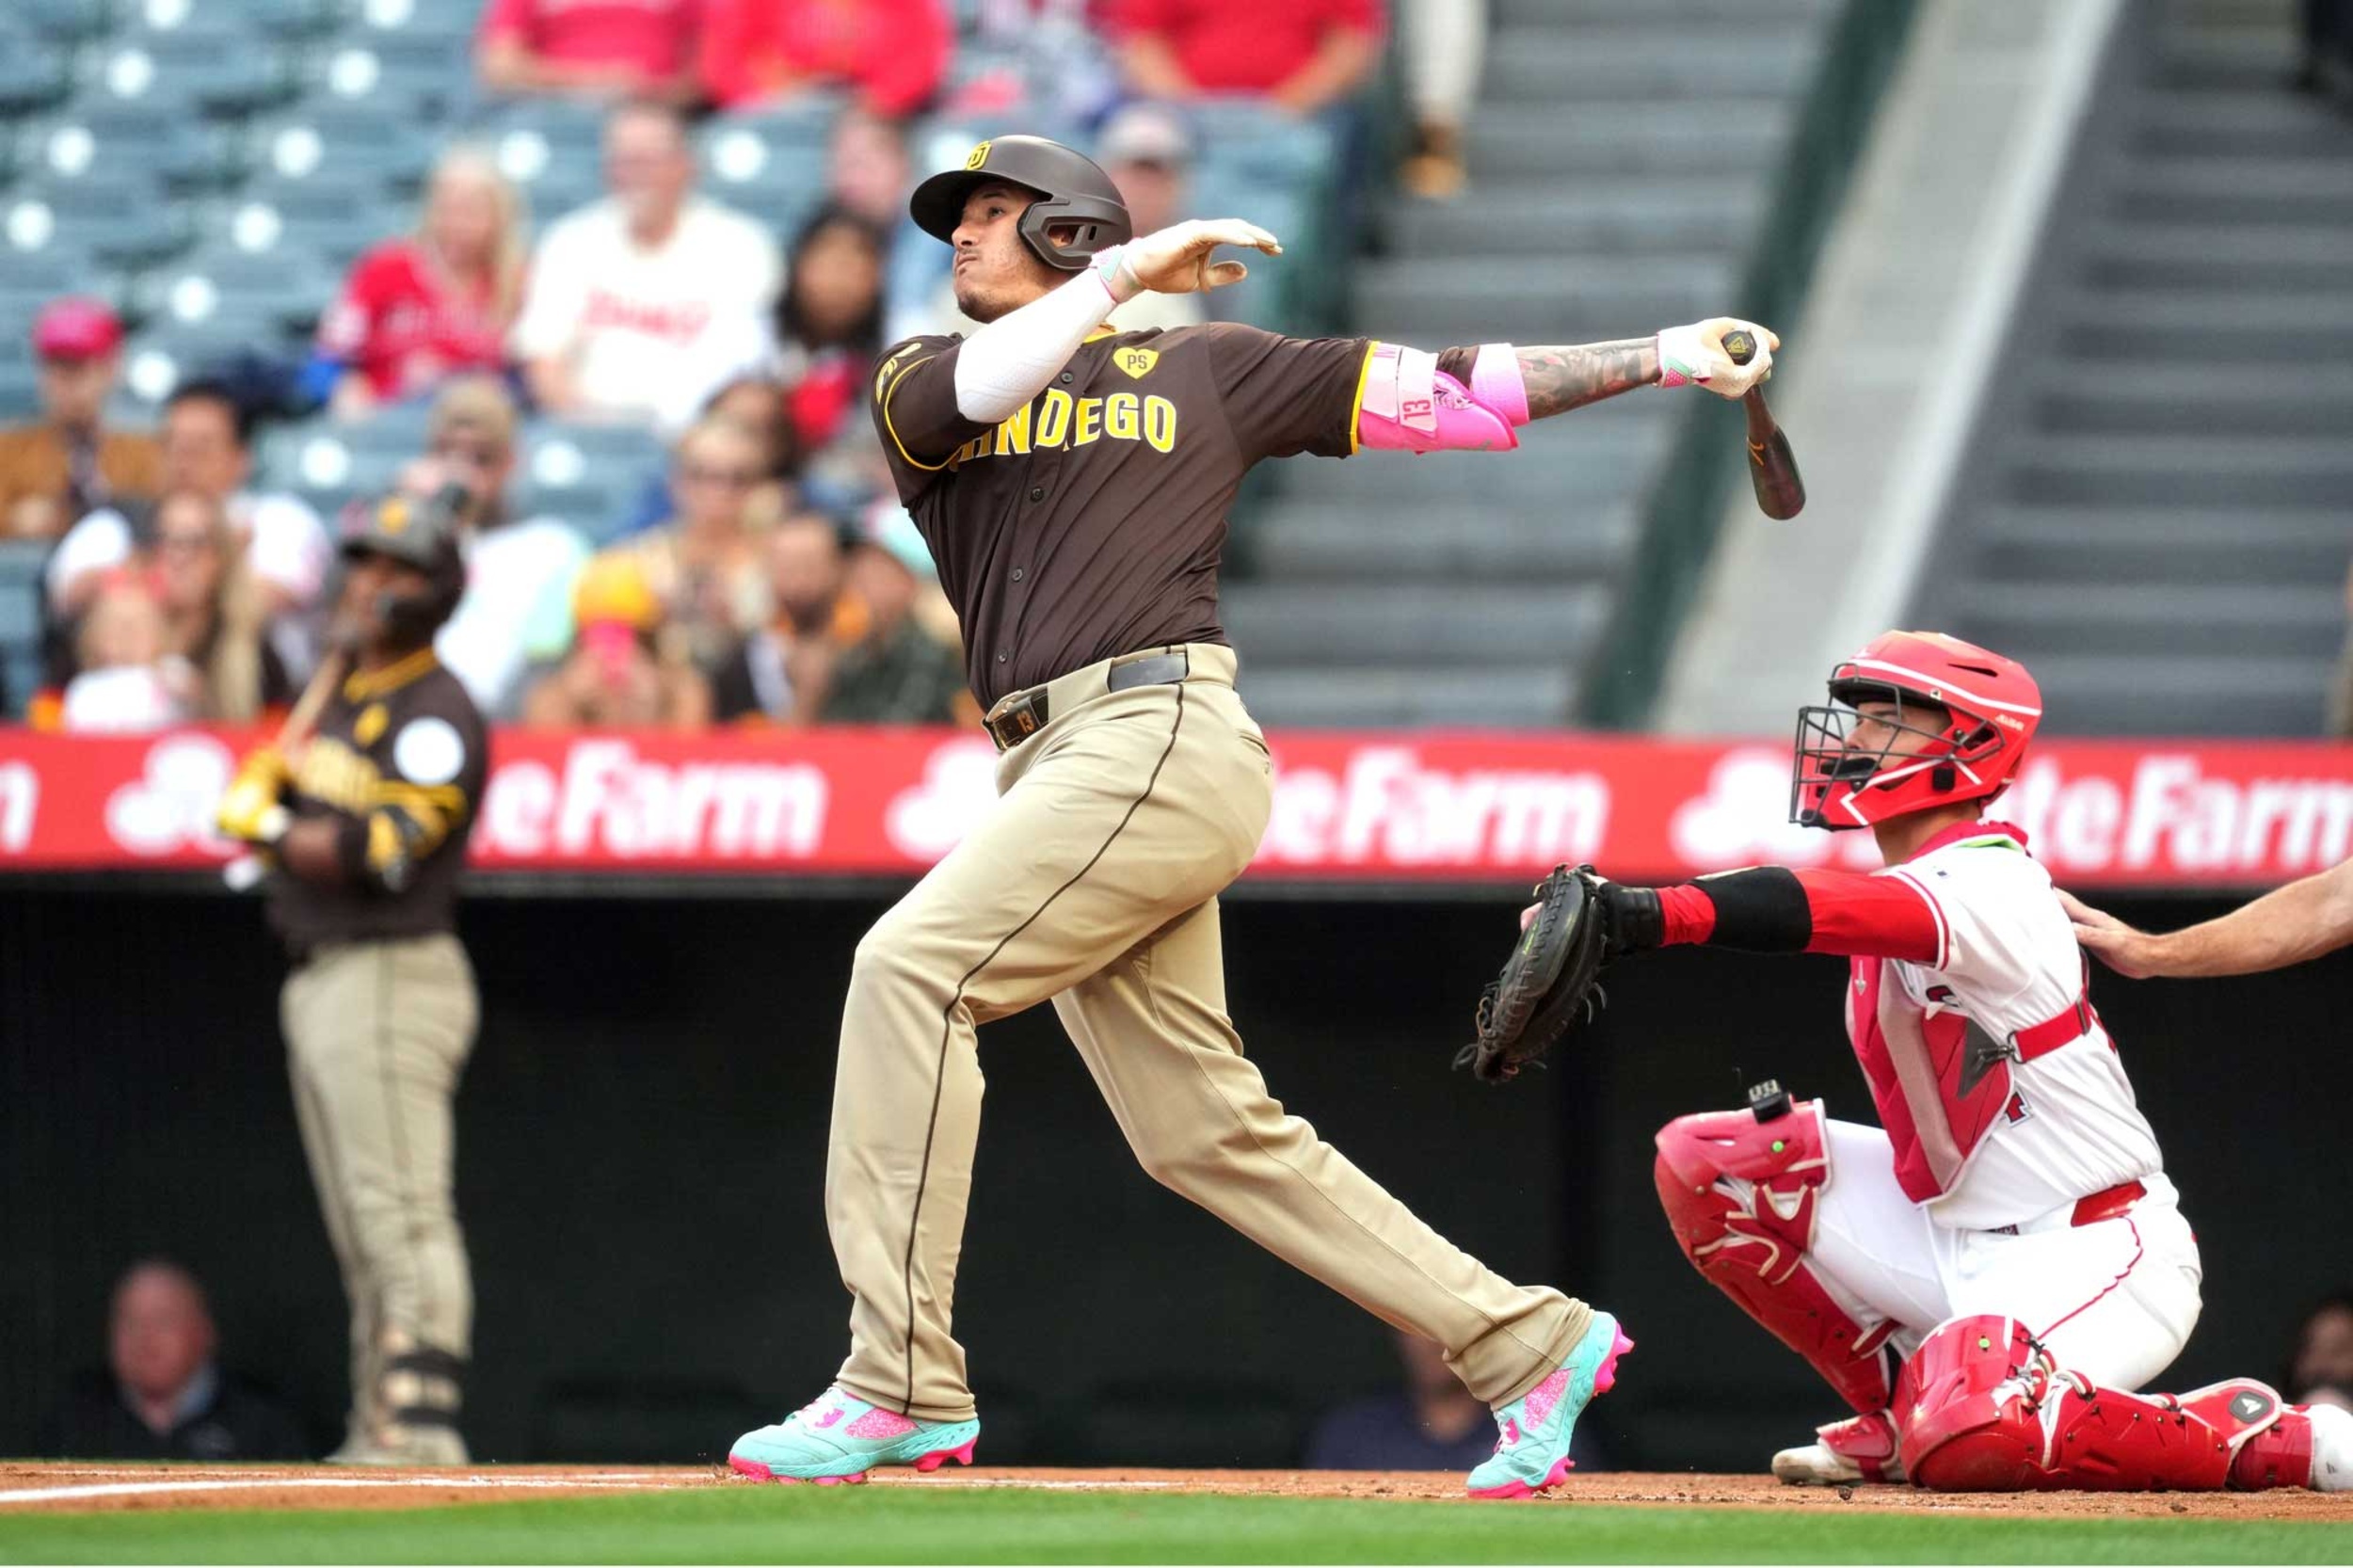 <p>It's not a big surprise Machado is off to a slow start after offseason elbow surgery, but the Padres really need his bat to wake up. He's hit only .248-6-32 with a .685 OPS through 61 games.</p><p>You may also like: <a href='https://www.yardbarker.com/mlb/articles/the_hardest_throwing_pitchers_in_mlb/s1__39858942'>The hardest-throwing pitchers in MLB</a></p>